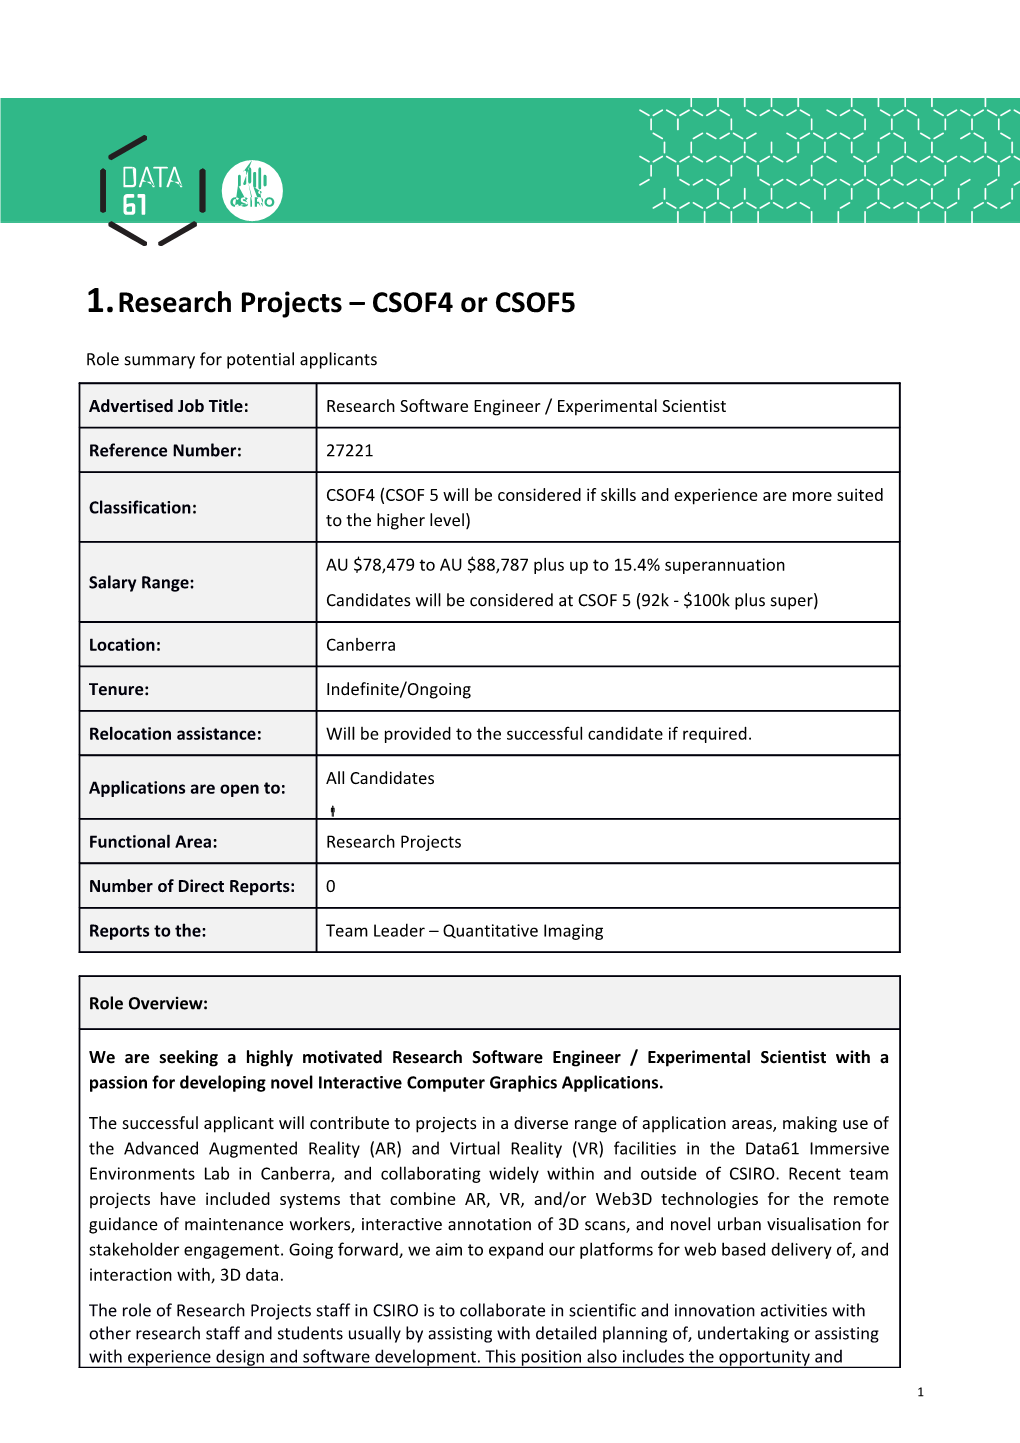 Research Projects CSOF4 Or CSOF5